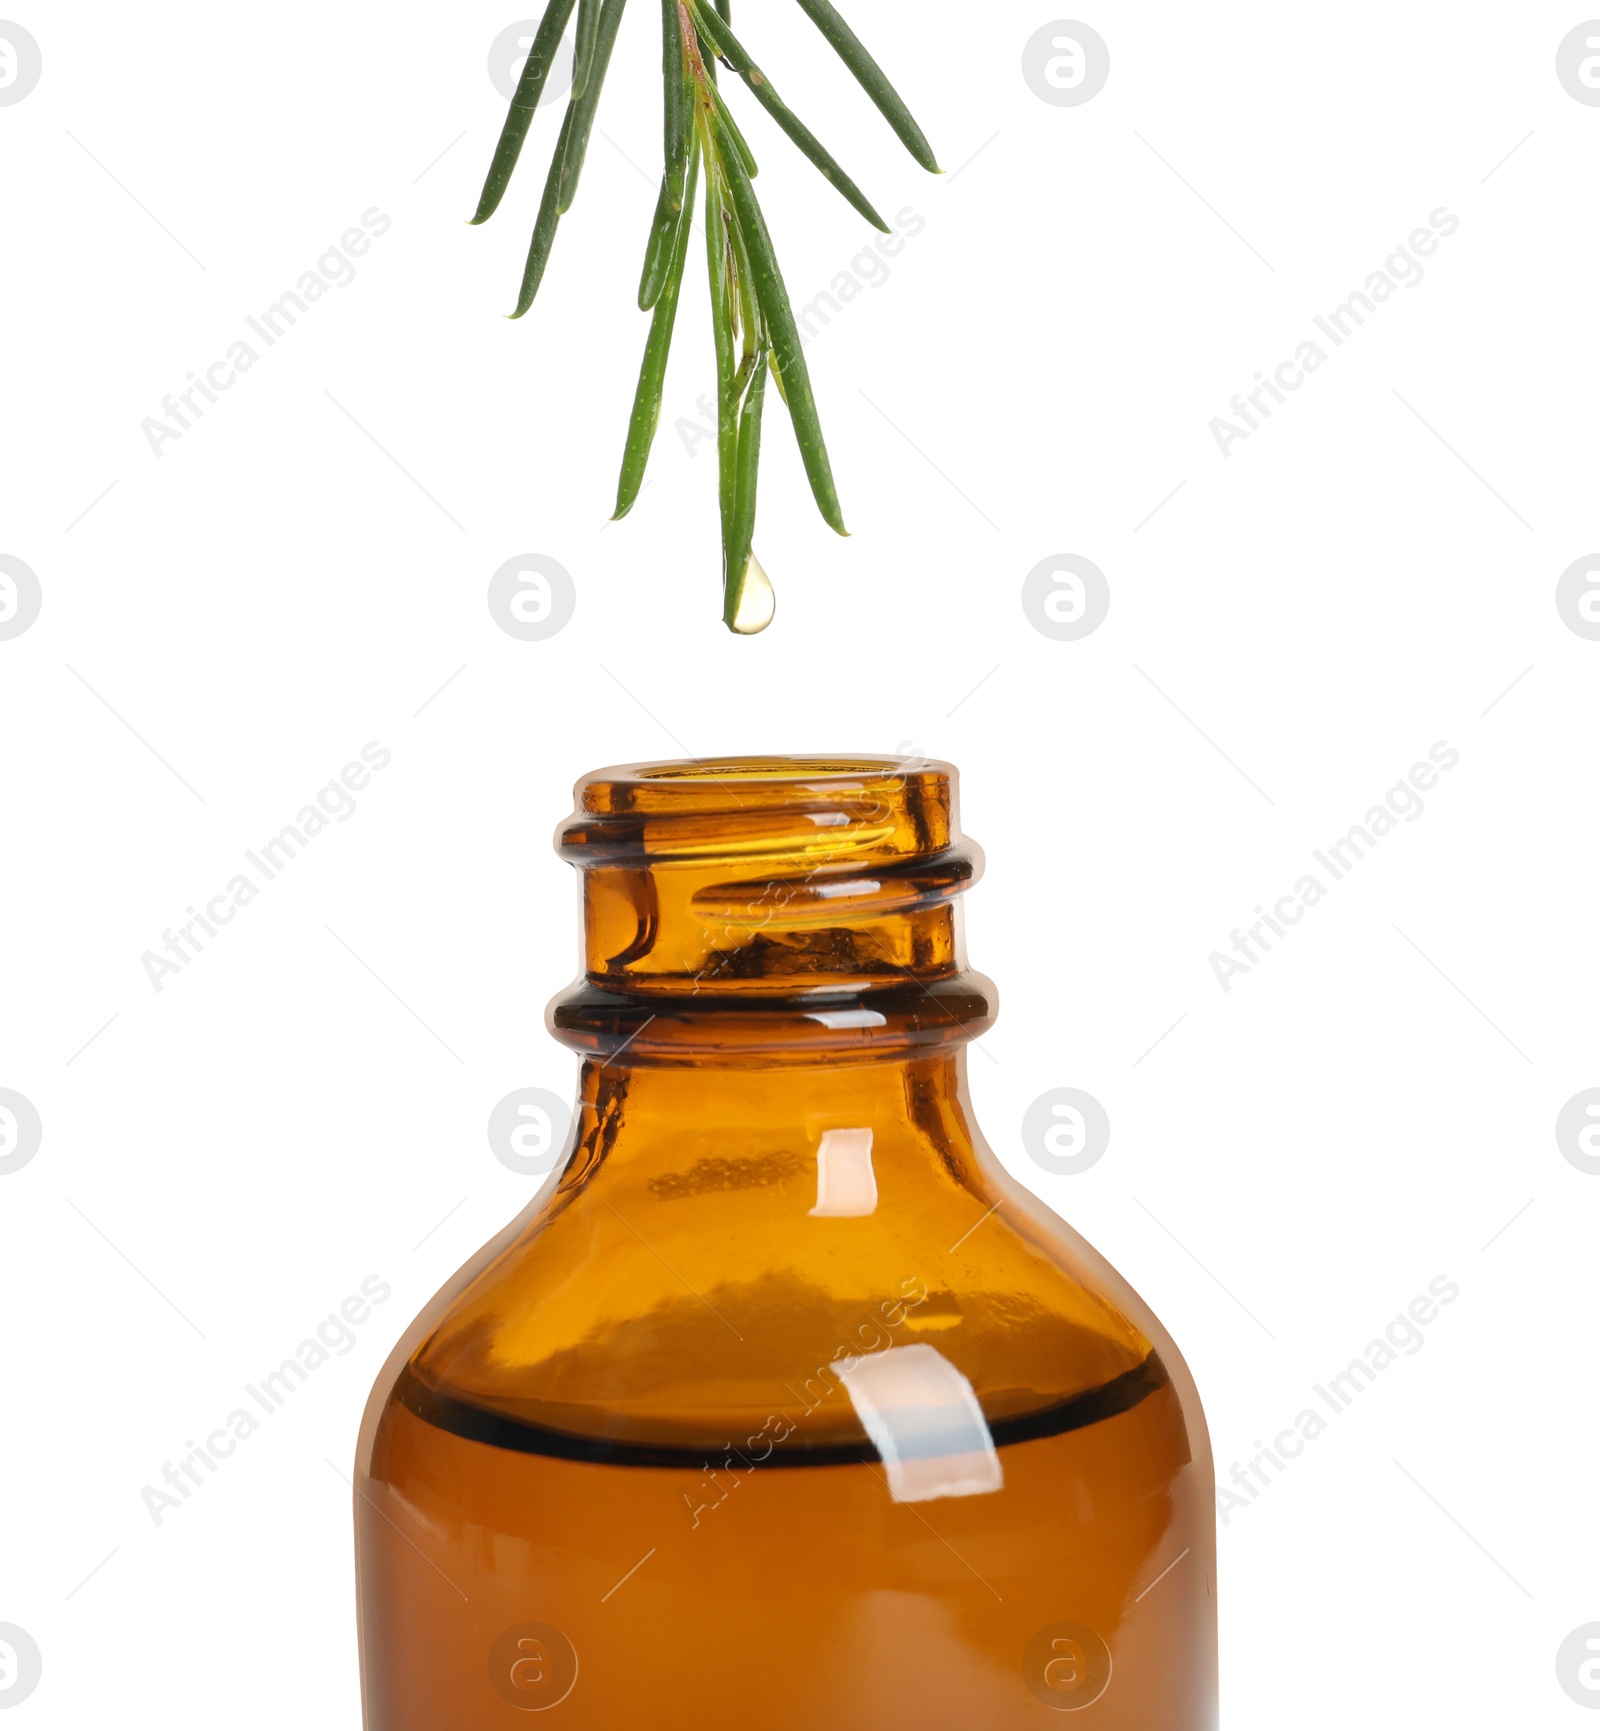 Photo of Dripping natural essential oil from tea tree branch into bottle on white background